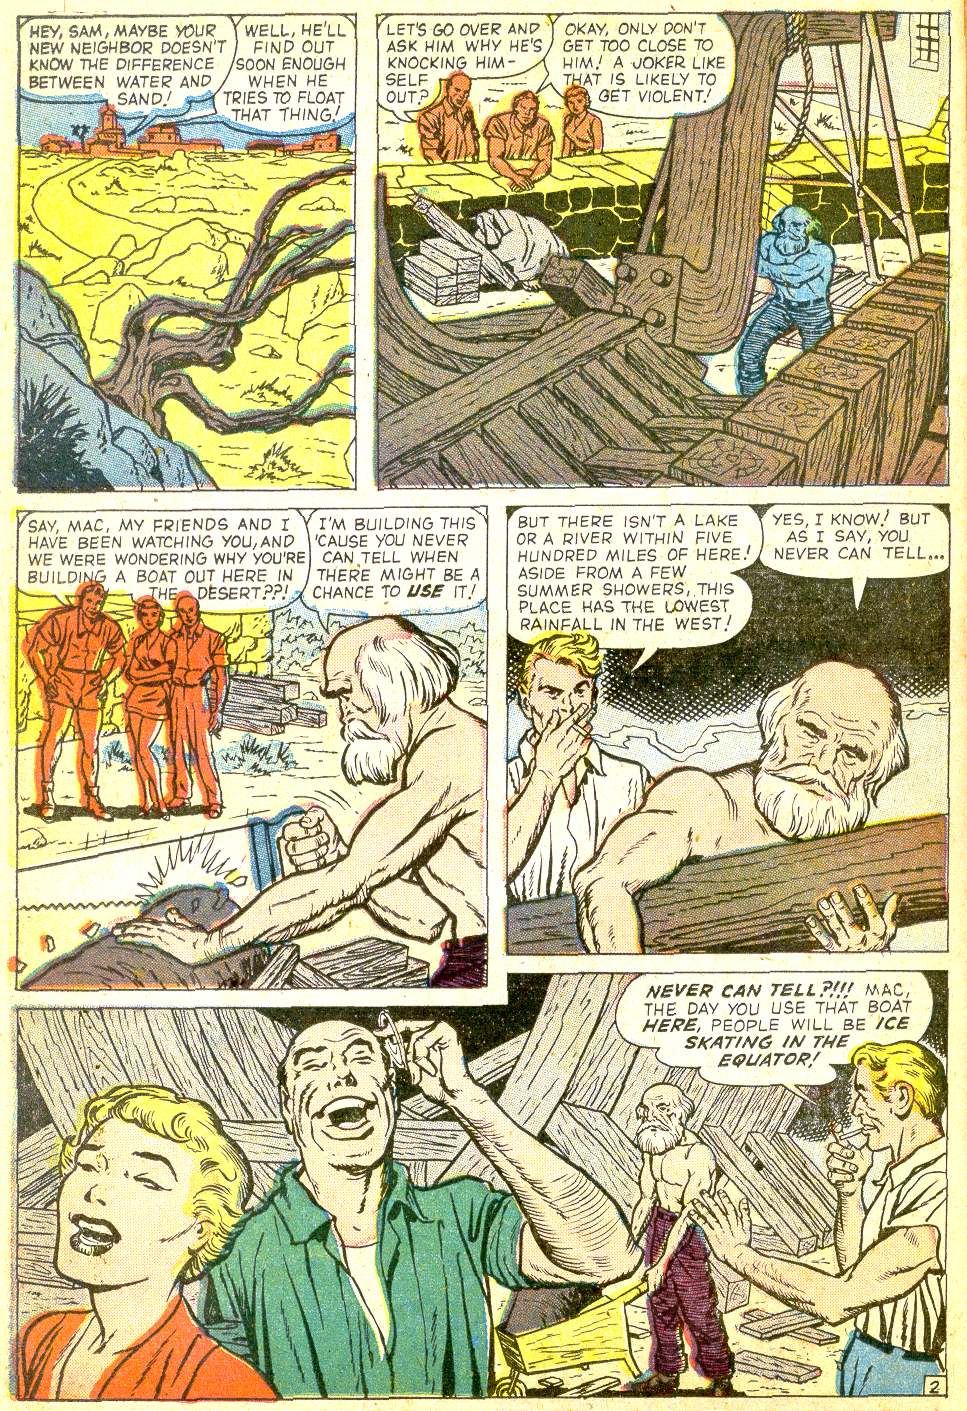 Journey Into Mystery (1952) 55 Page 21